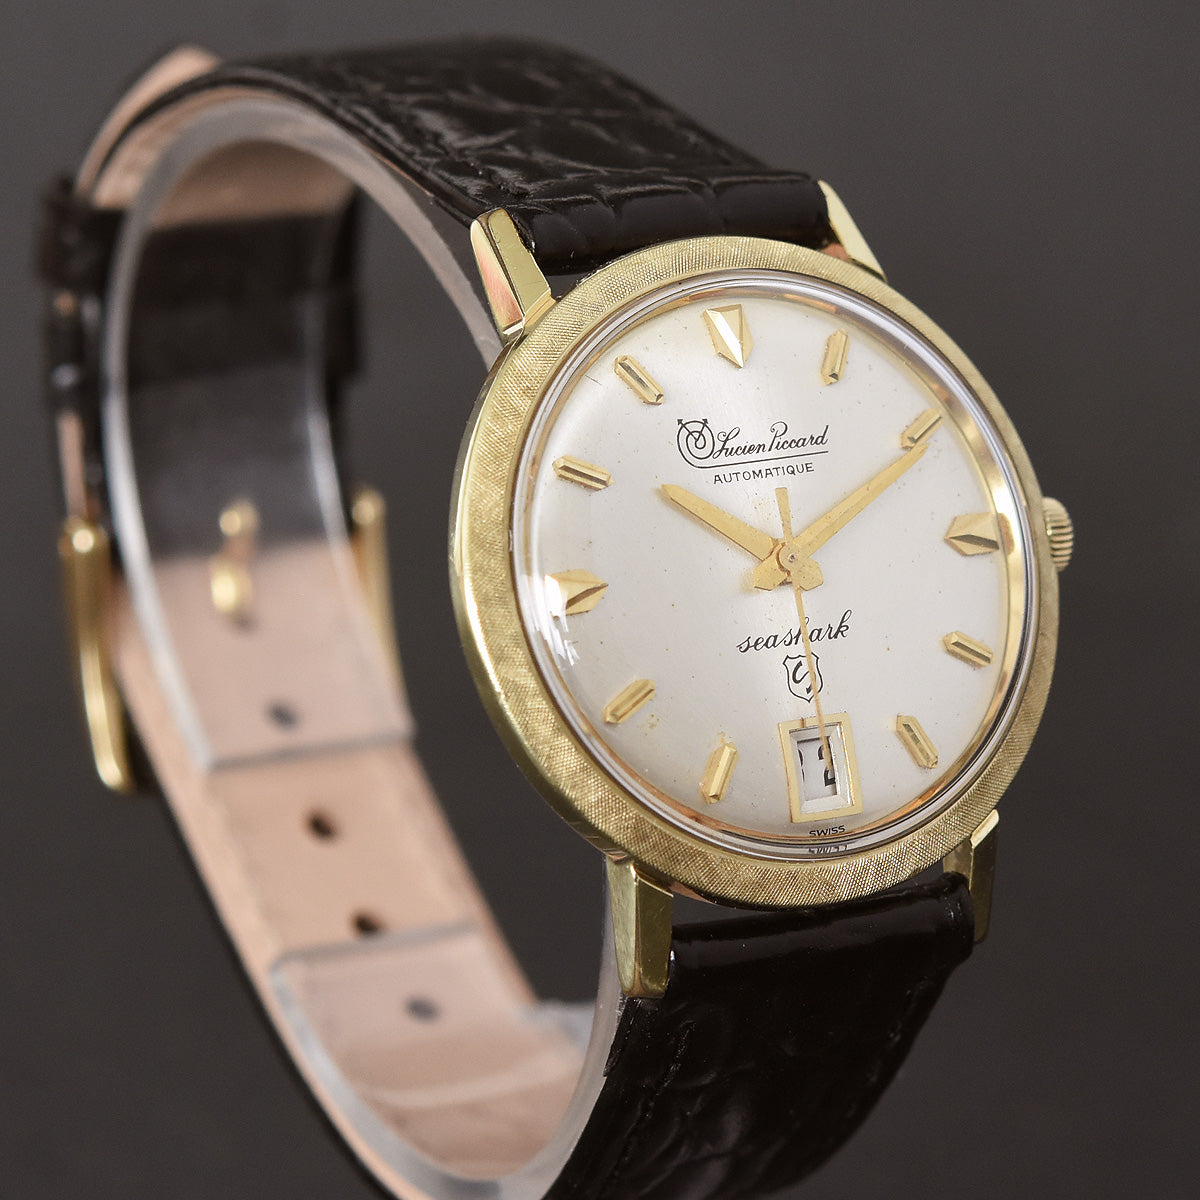 60s Lucien Piccard Seashark Automatic Date Swiss Vintage Watch ...